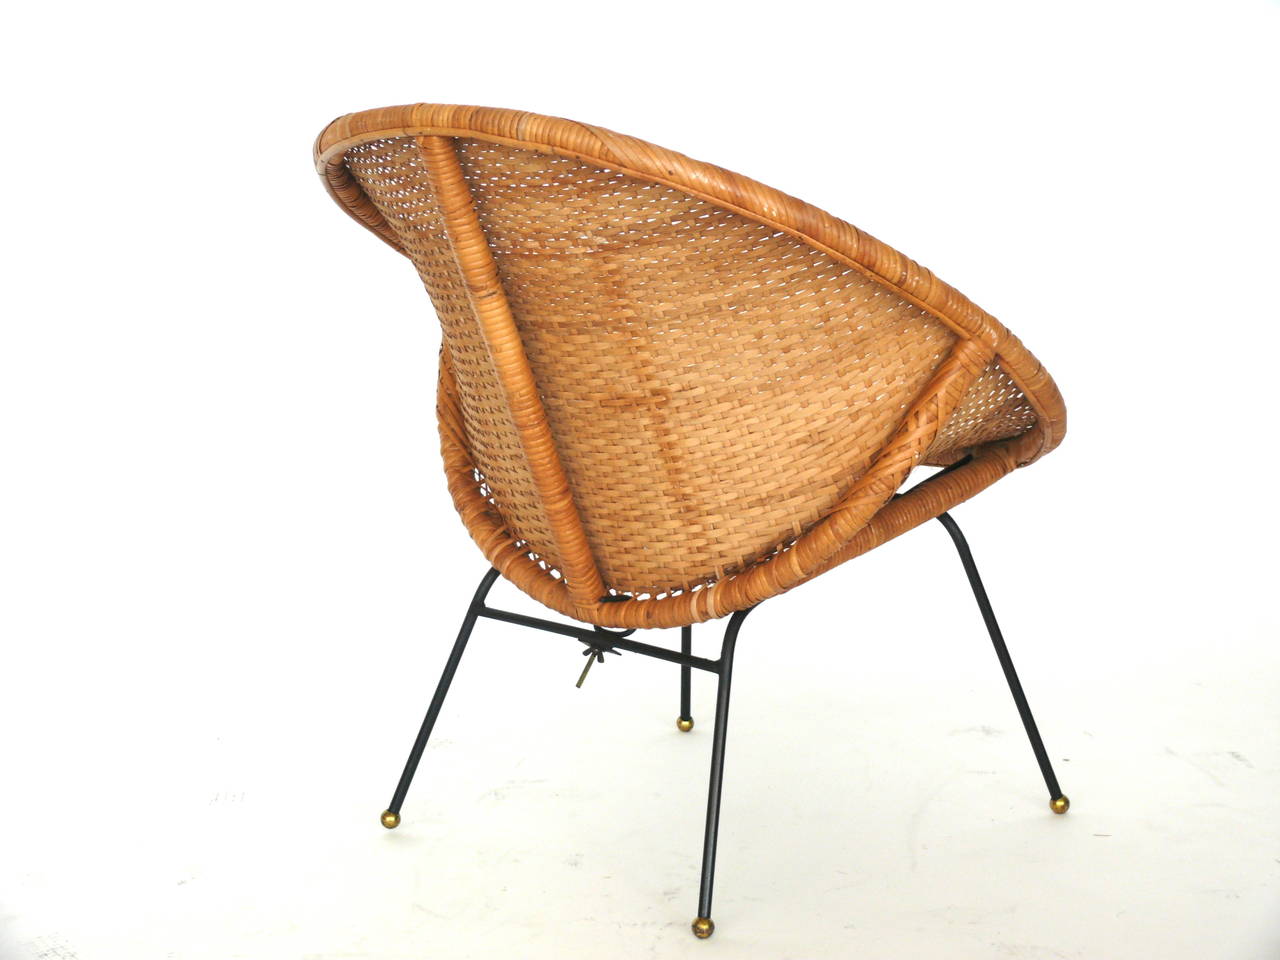 American Woven Wicker and Iron Bucket Chairs